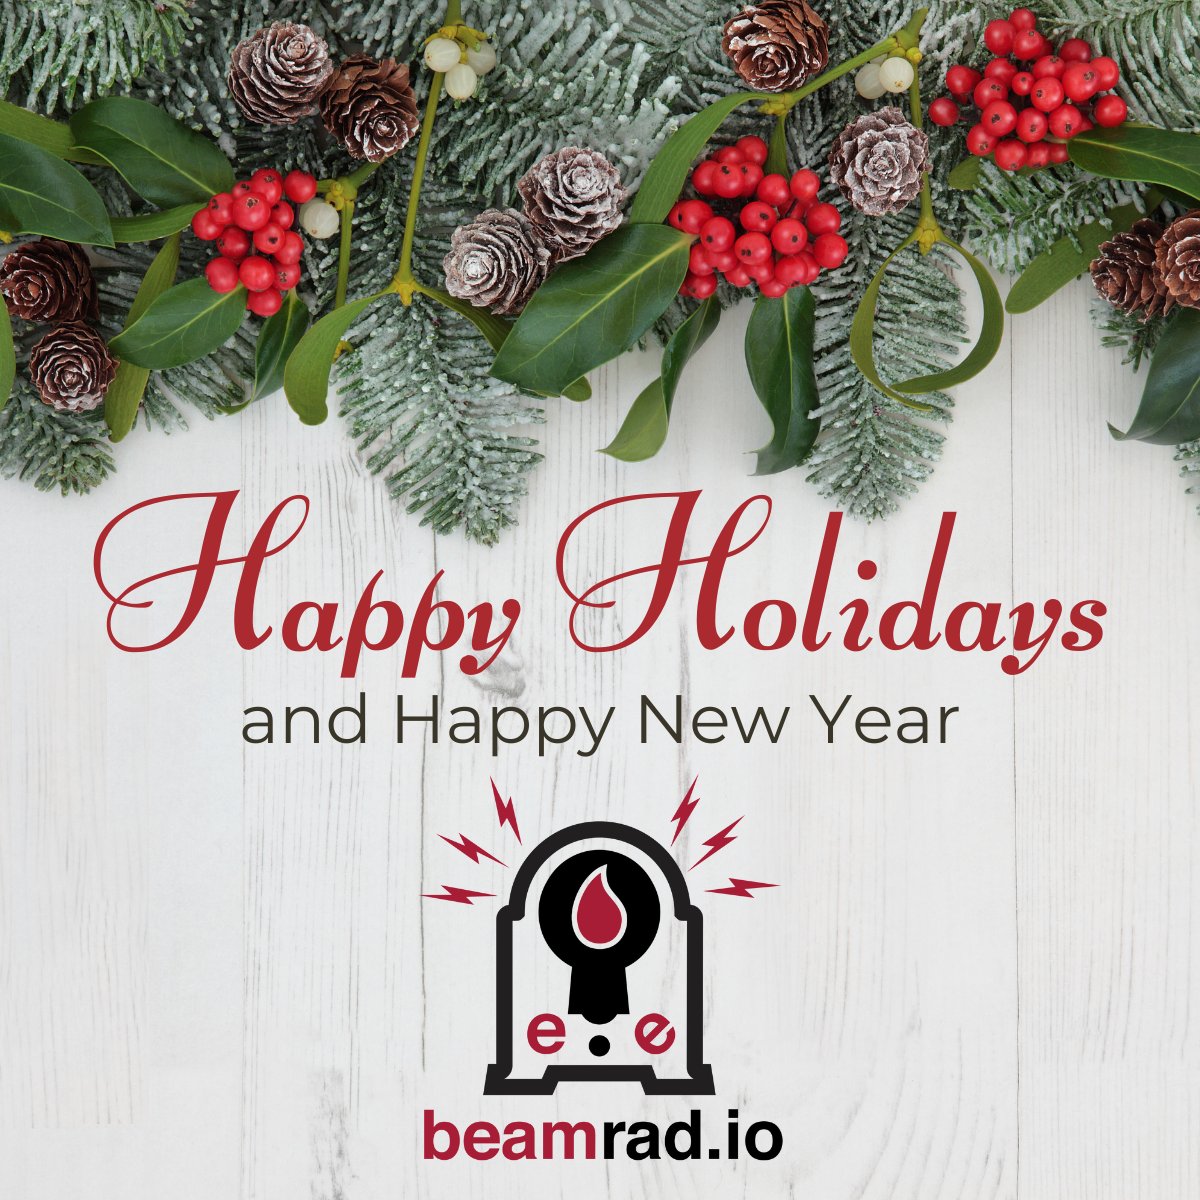 A BIG And thank you to all our listeners! We've had over 71,000 downloads! Thank you to @redrapids @lawik @sm_debenedetto @meryldakin @_StevenNunez & @akoutmos for all the work that goes into this BeamRad.io podcast. Happy Holidays and have a wonderful 2024.